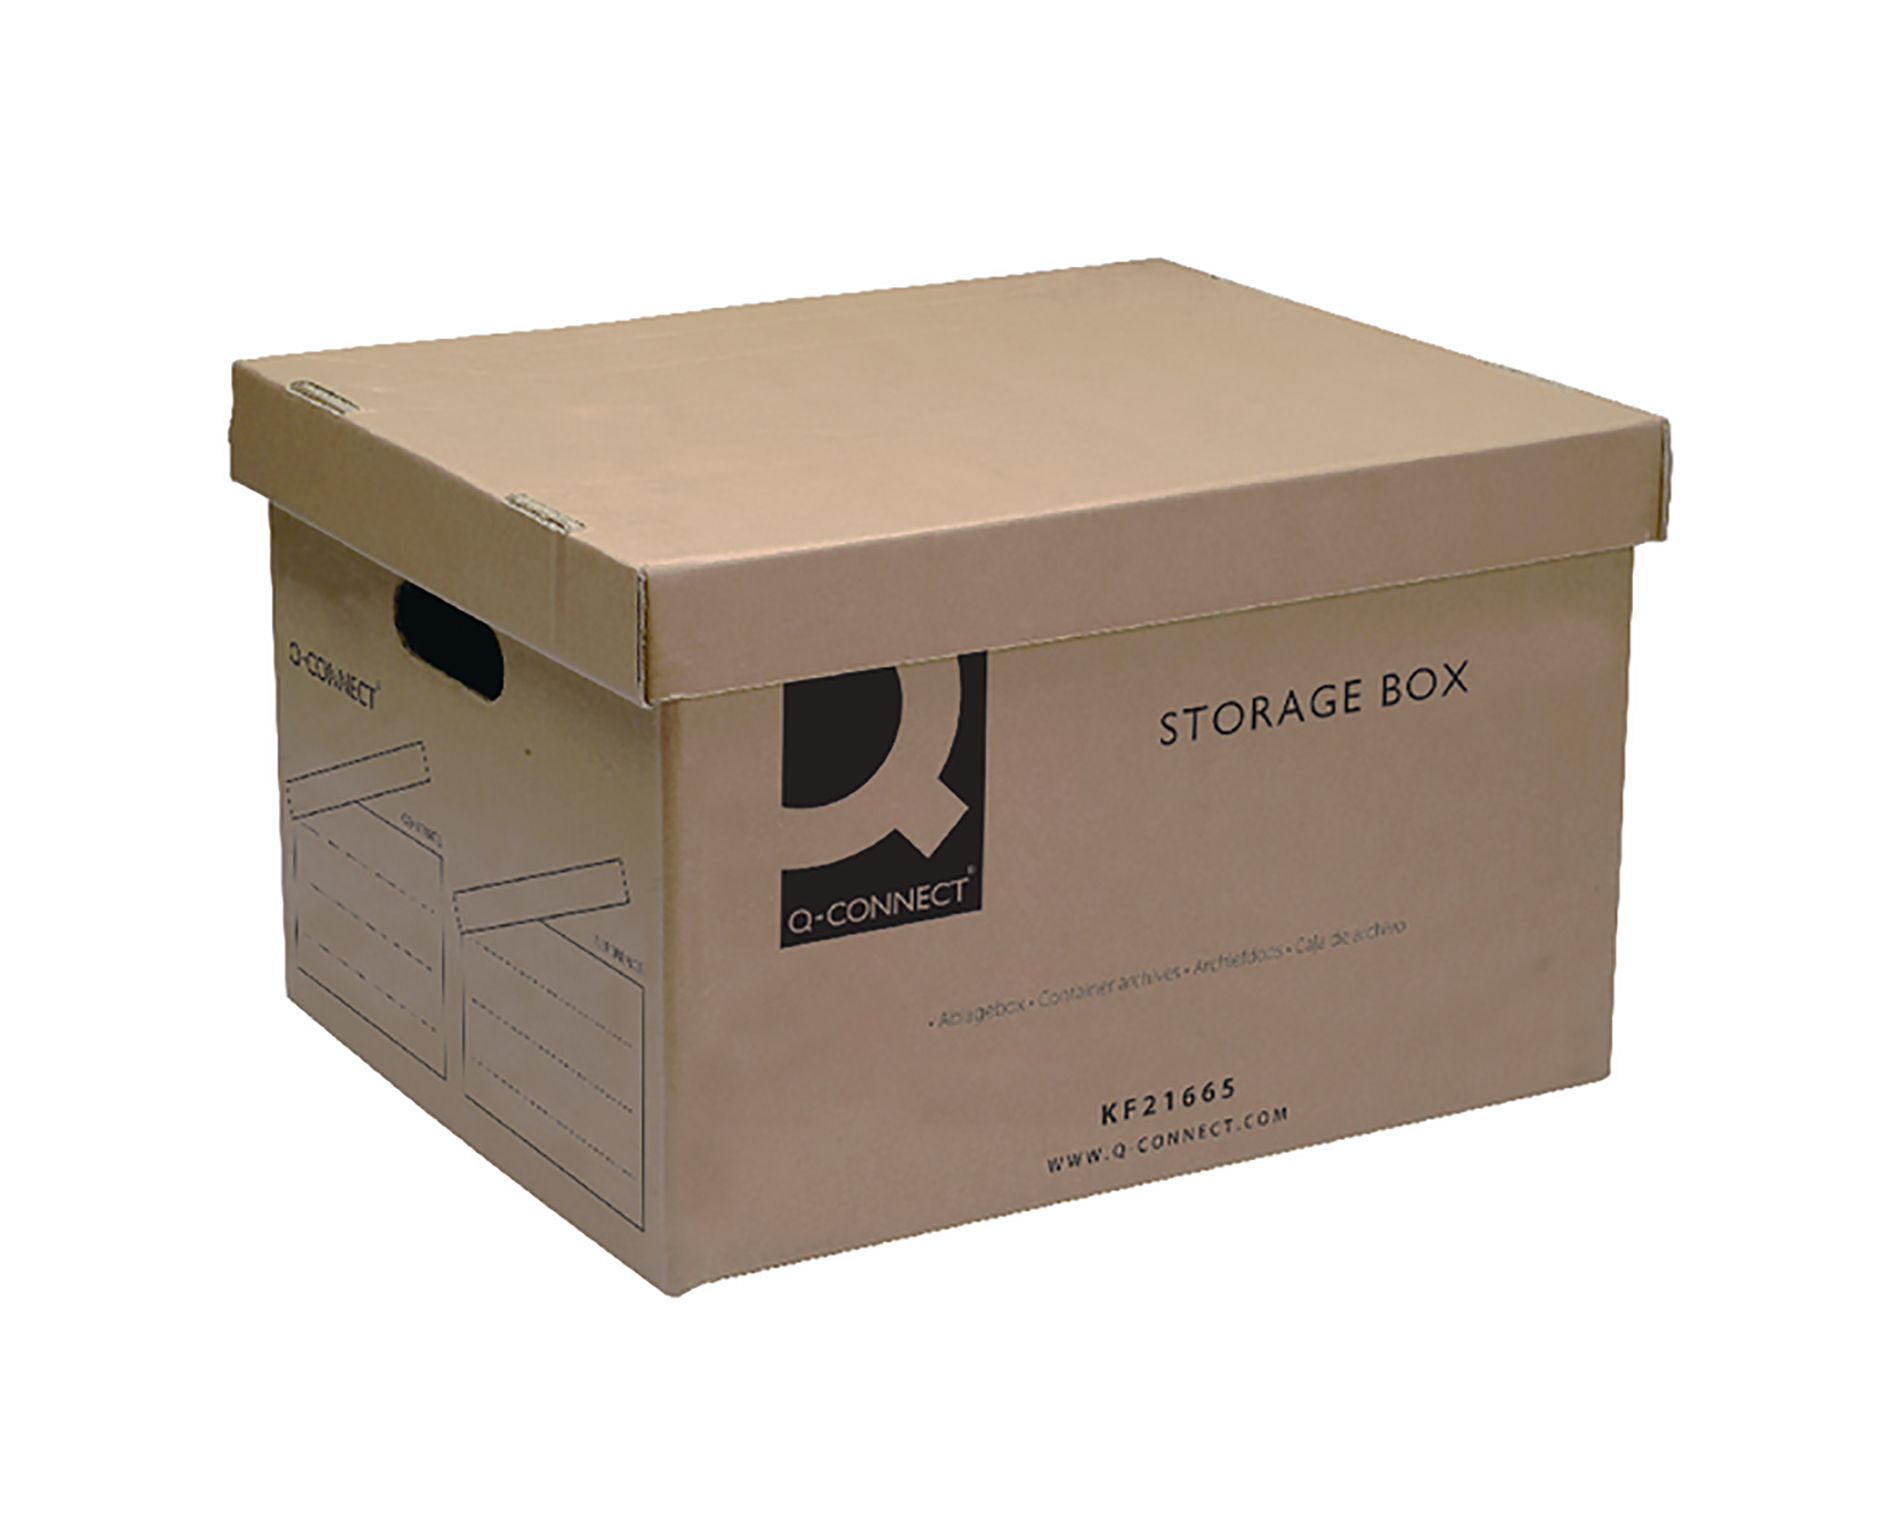 Cardboard Storage Boxes Packing Moving Boxes Ryman throughout dimensions 1890 X 1540